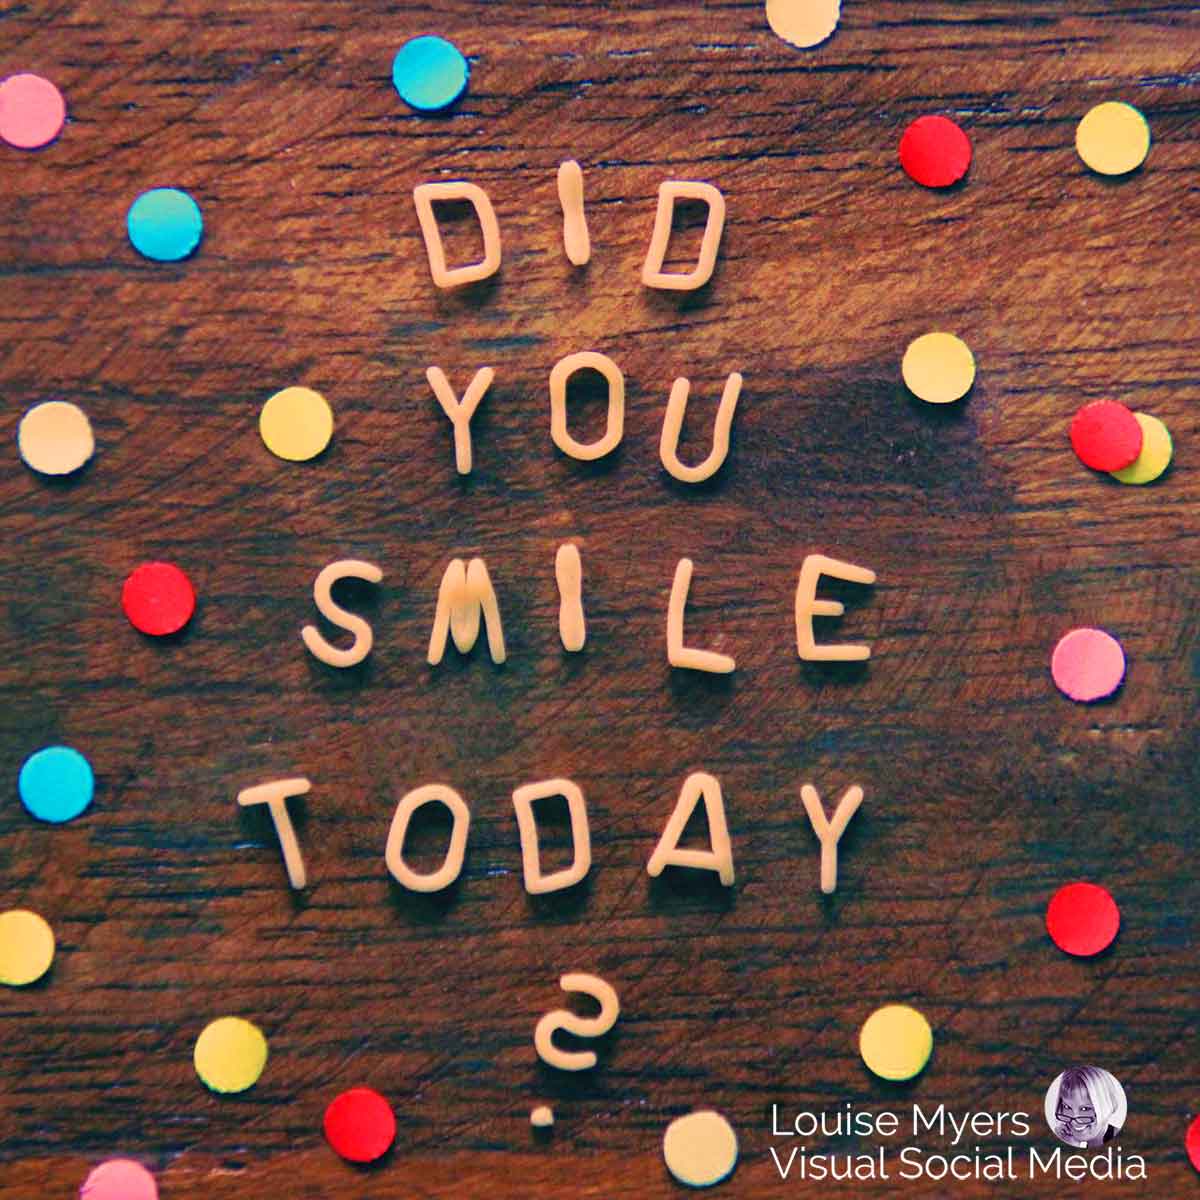 letters spell did you smile today on wood background with colorful dots.